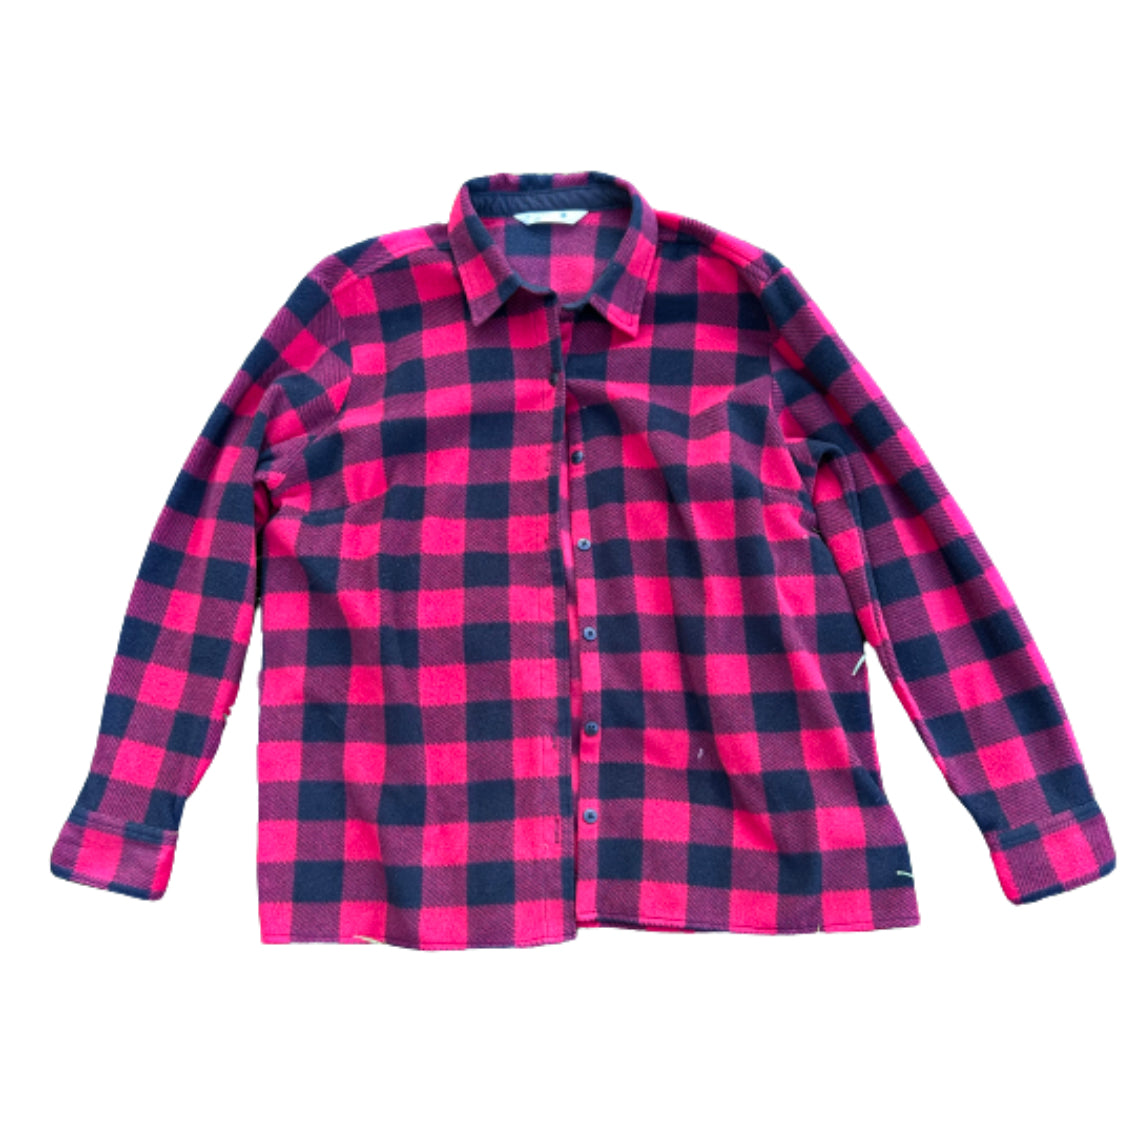 NEW GIRL: Nick Miller's LEE Jeans Buffalo Plaid Flannel Shirt